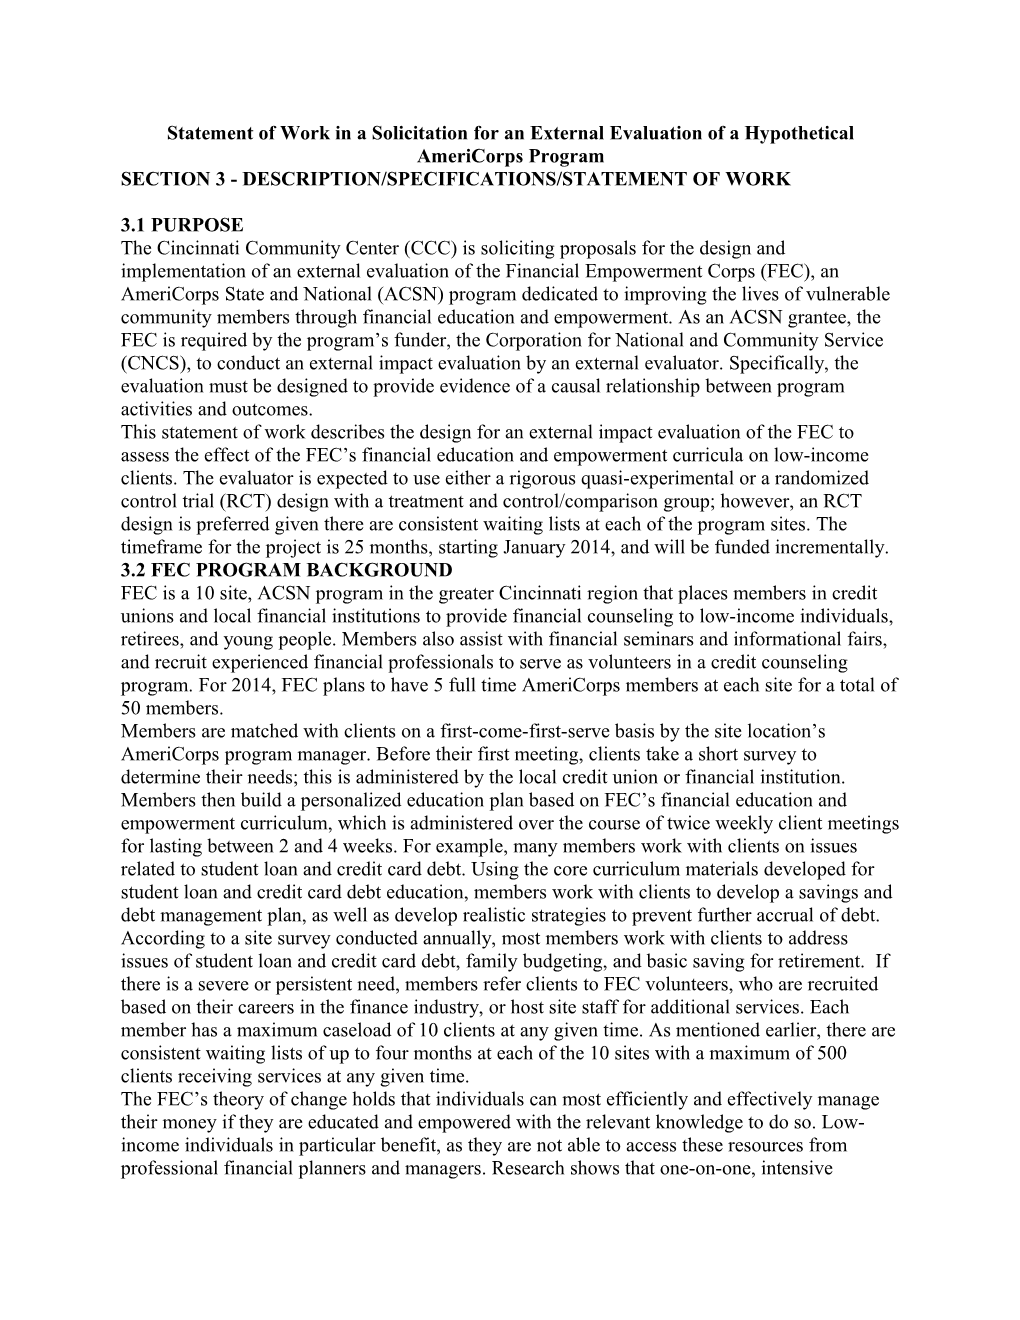 Statement of Work in a Solicitation for an External Evaluation Ofa Hypothetical Americorps